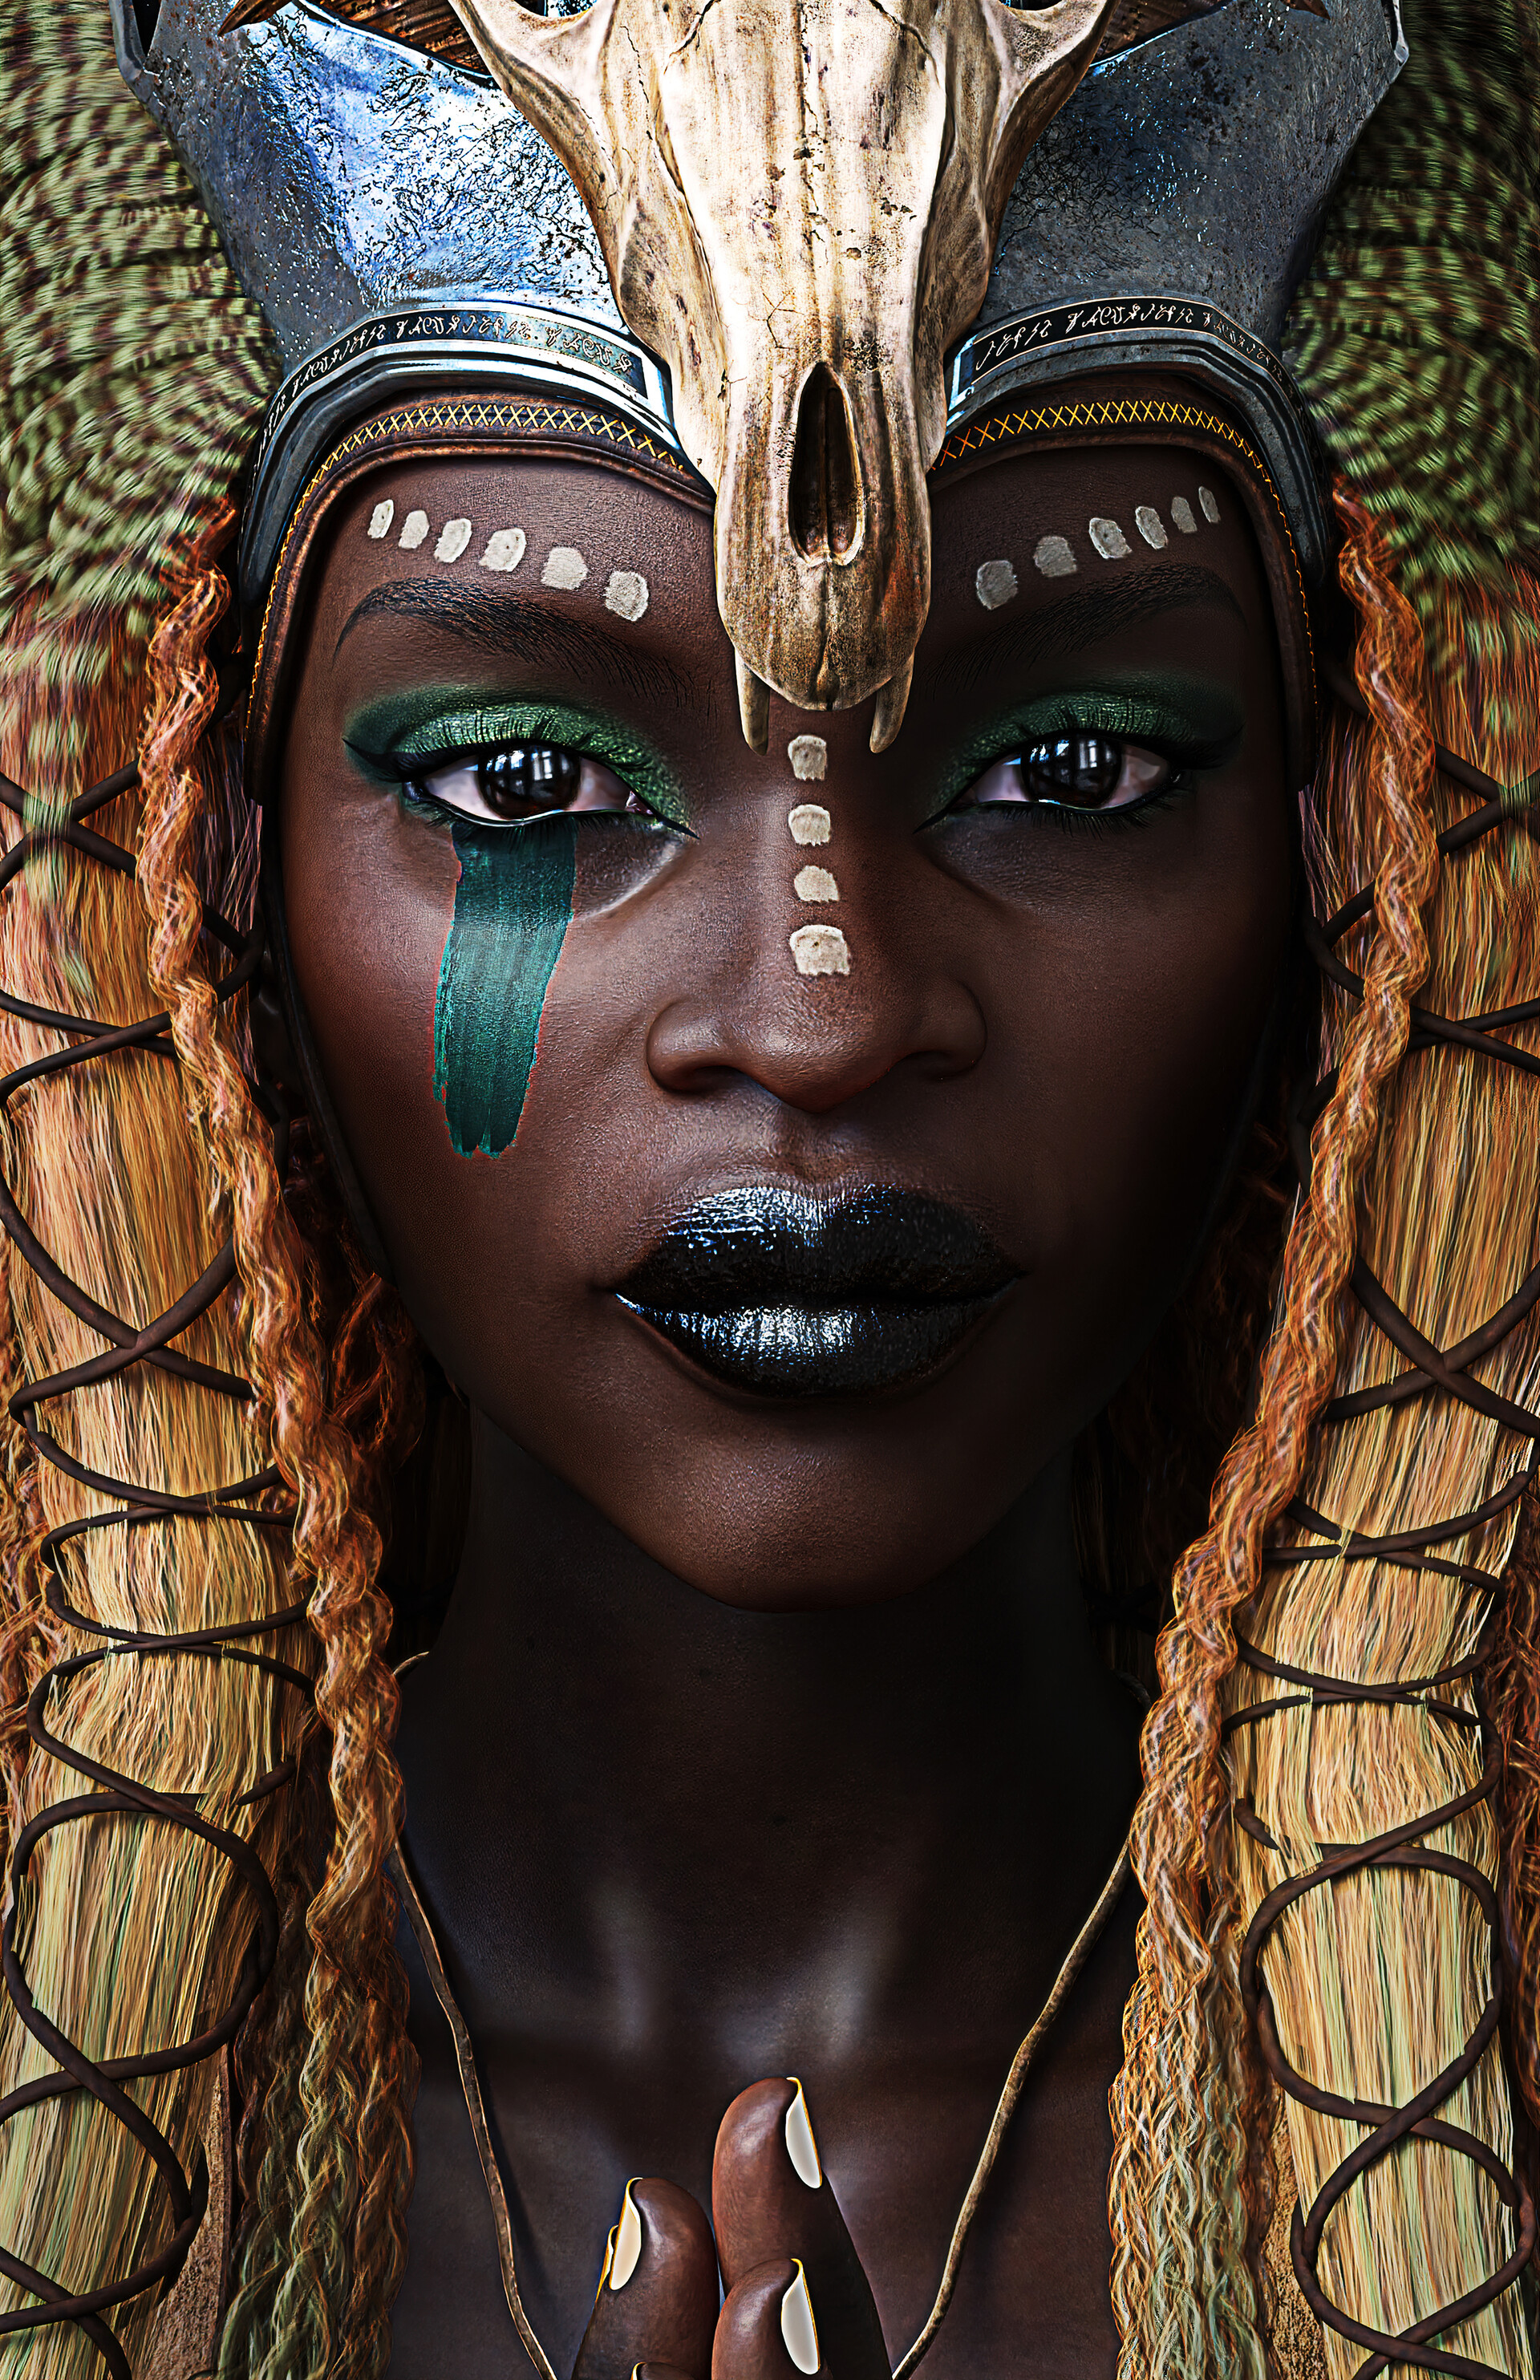 African queen artist jennifer donohoe software used